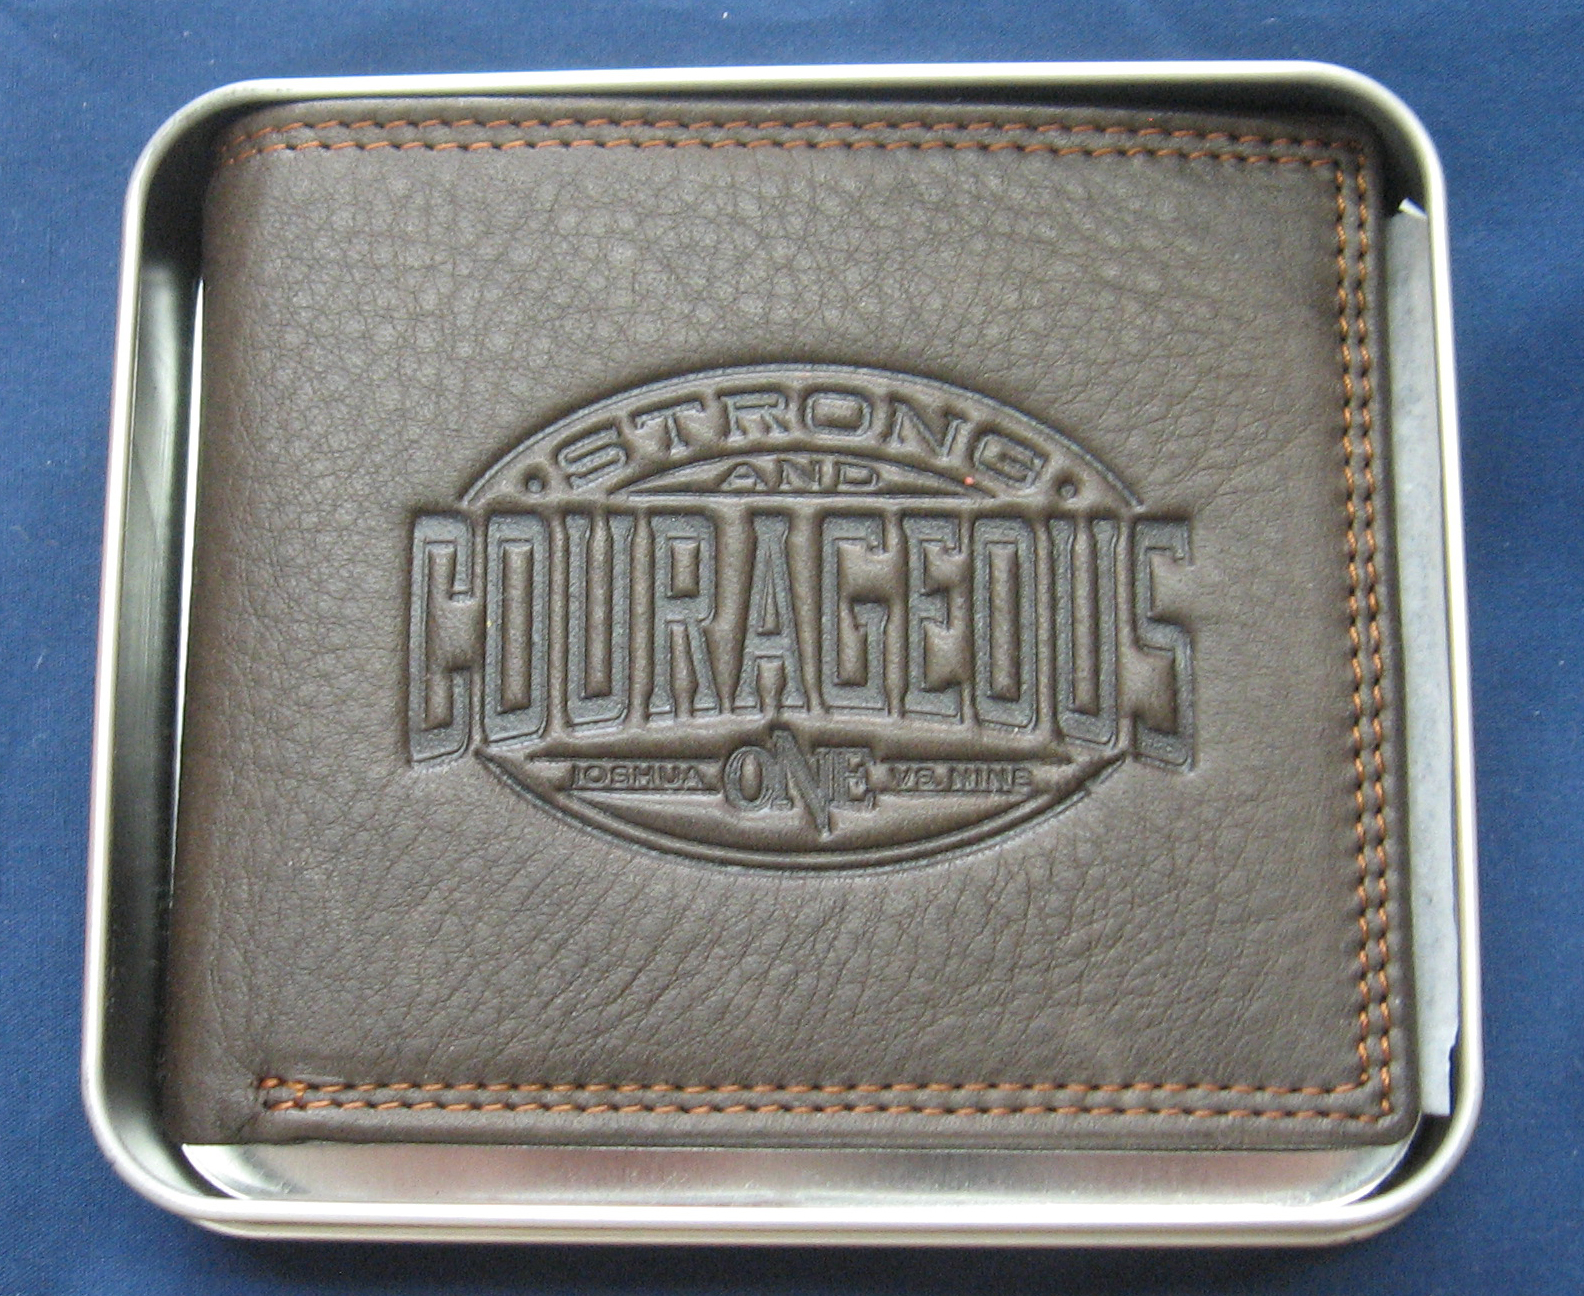 Strong and Courageous JOSHUA ONE VERSE NINE Leather Wallet in Durable Tin